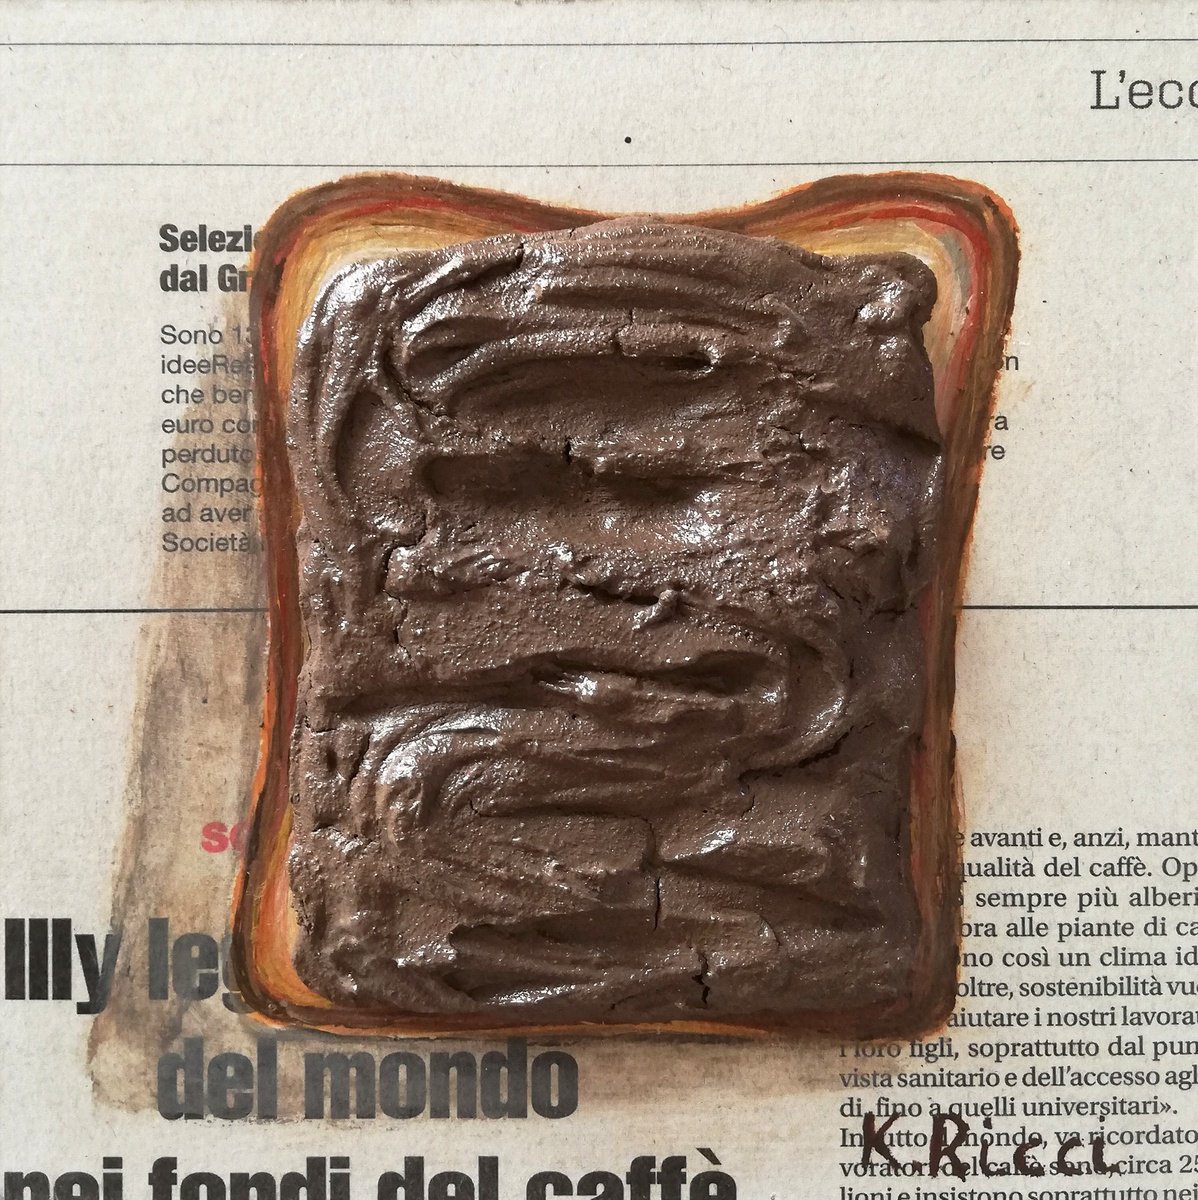 Toast with Nutella Original Acrylic on Wooden Board Painting 6 by 6 inches (15x15 cm) by Katia Ricci